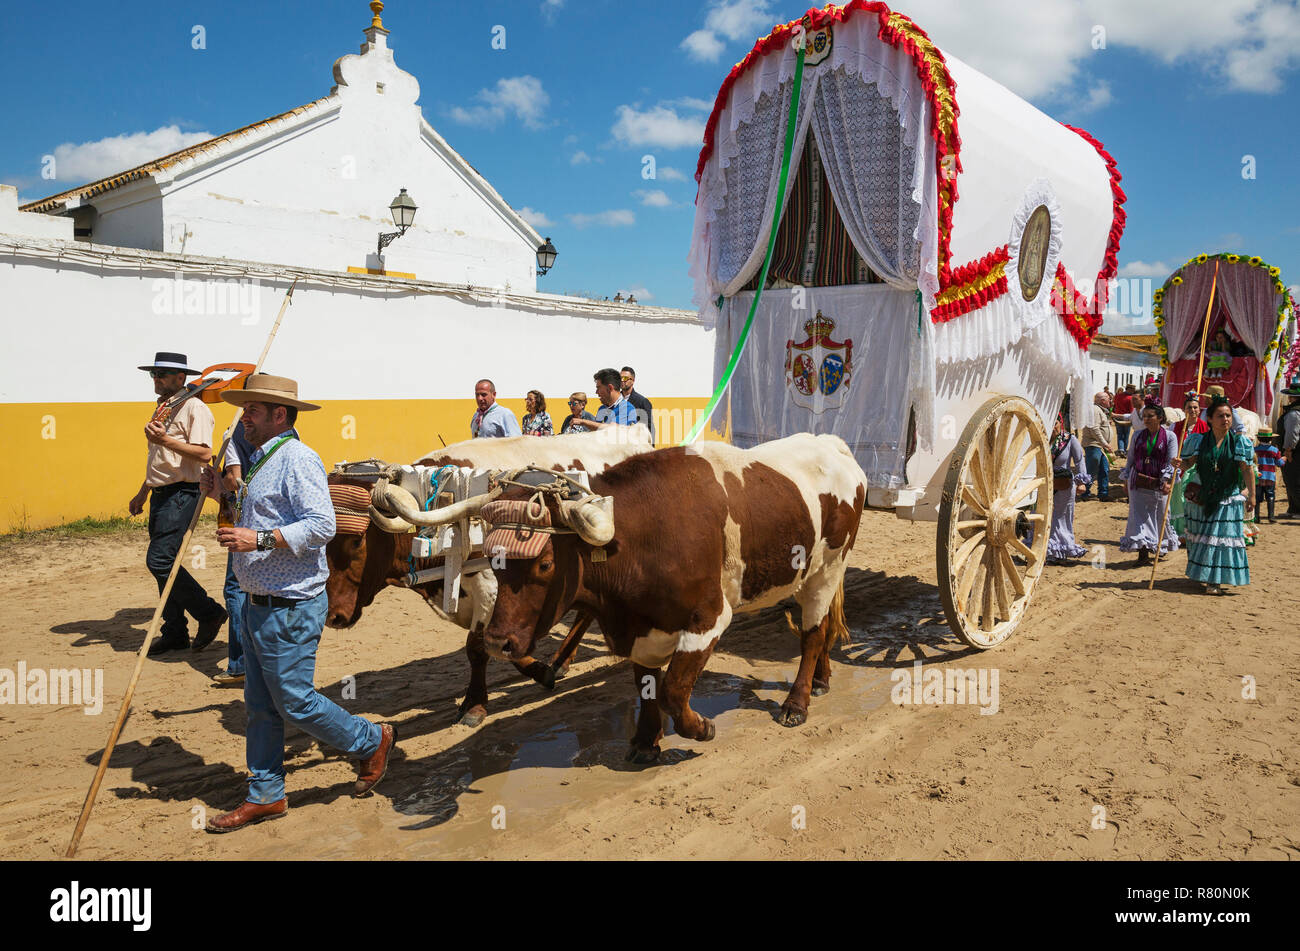 During a famous Pentecost pilgrimage the village of El Rocio converts into a colourful spectacle with beautifully decorated ox-carts, dressed up men and women wearing beautifully coloured gypsy dresses. Huelva province, Andalusia, Spain. Stock Photo